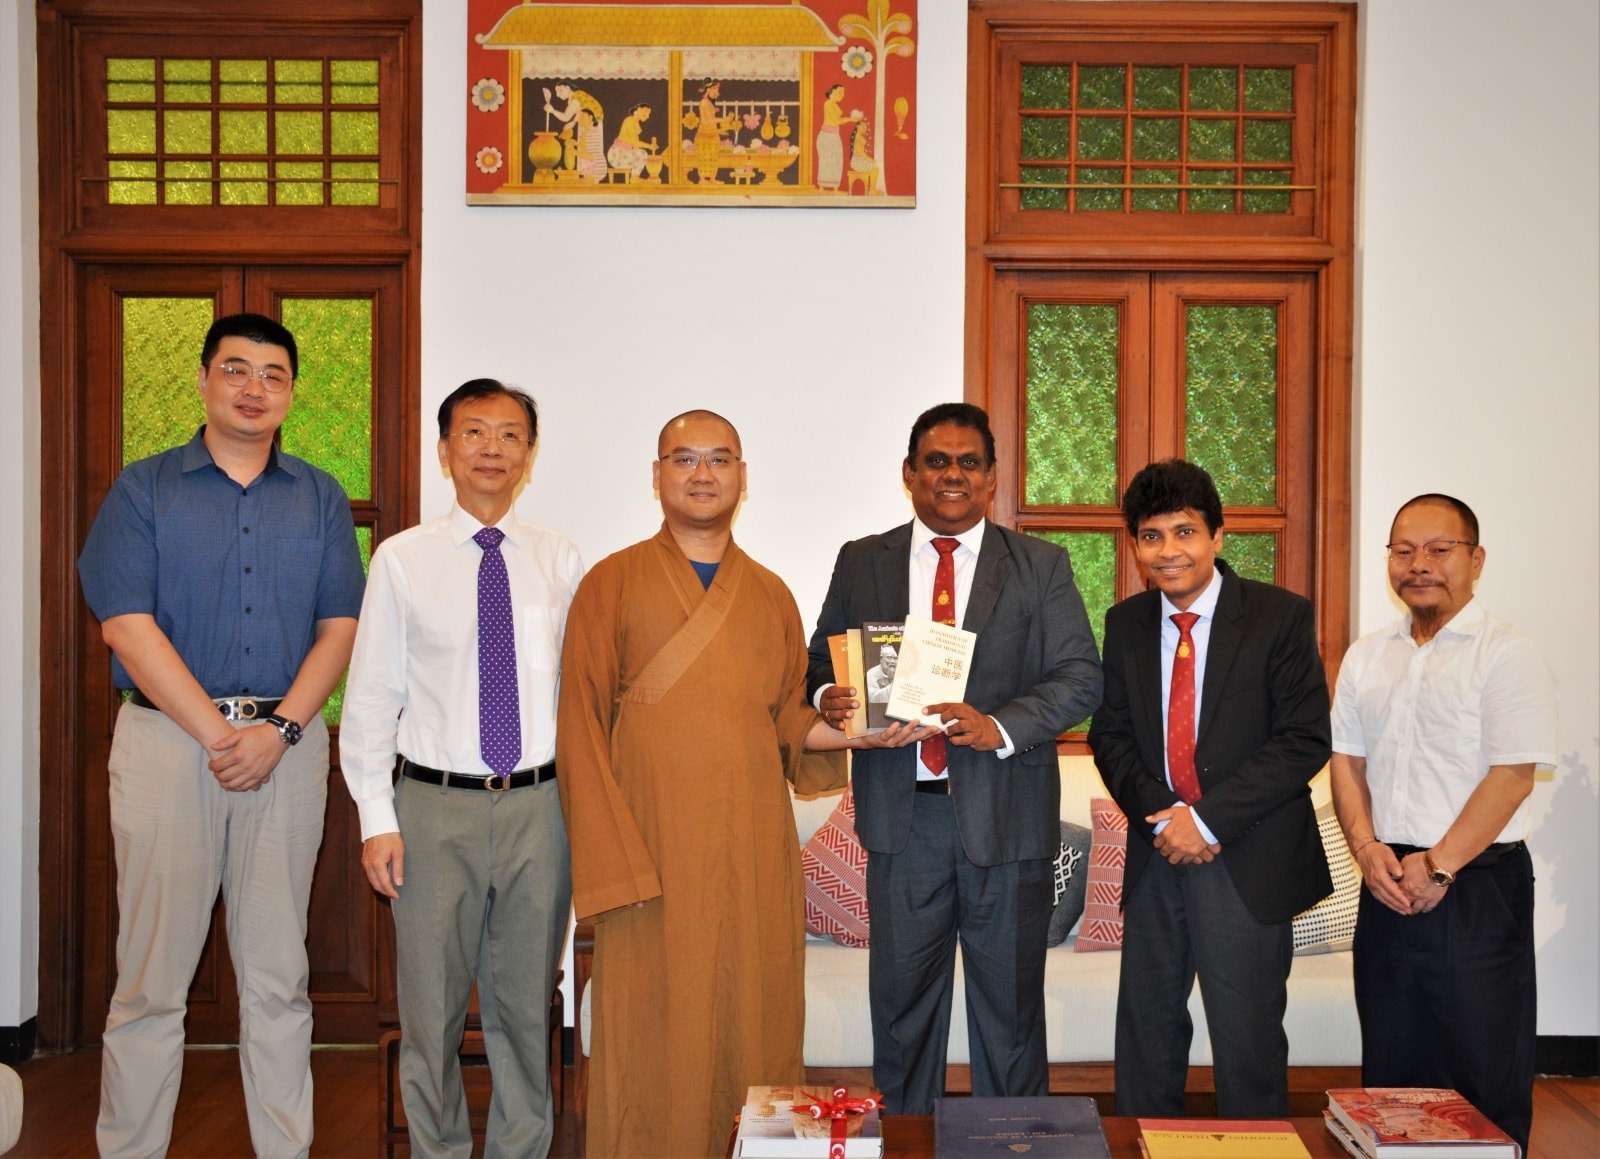 Donated 200 books on Traditional Medicine to Faculty of Indigenous Medicine by Exco Members of the International Postgraduate Student Association of University of Colombo